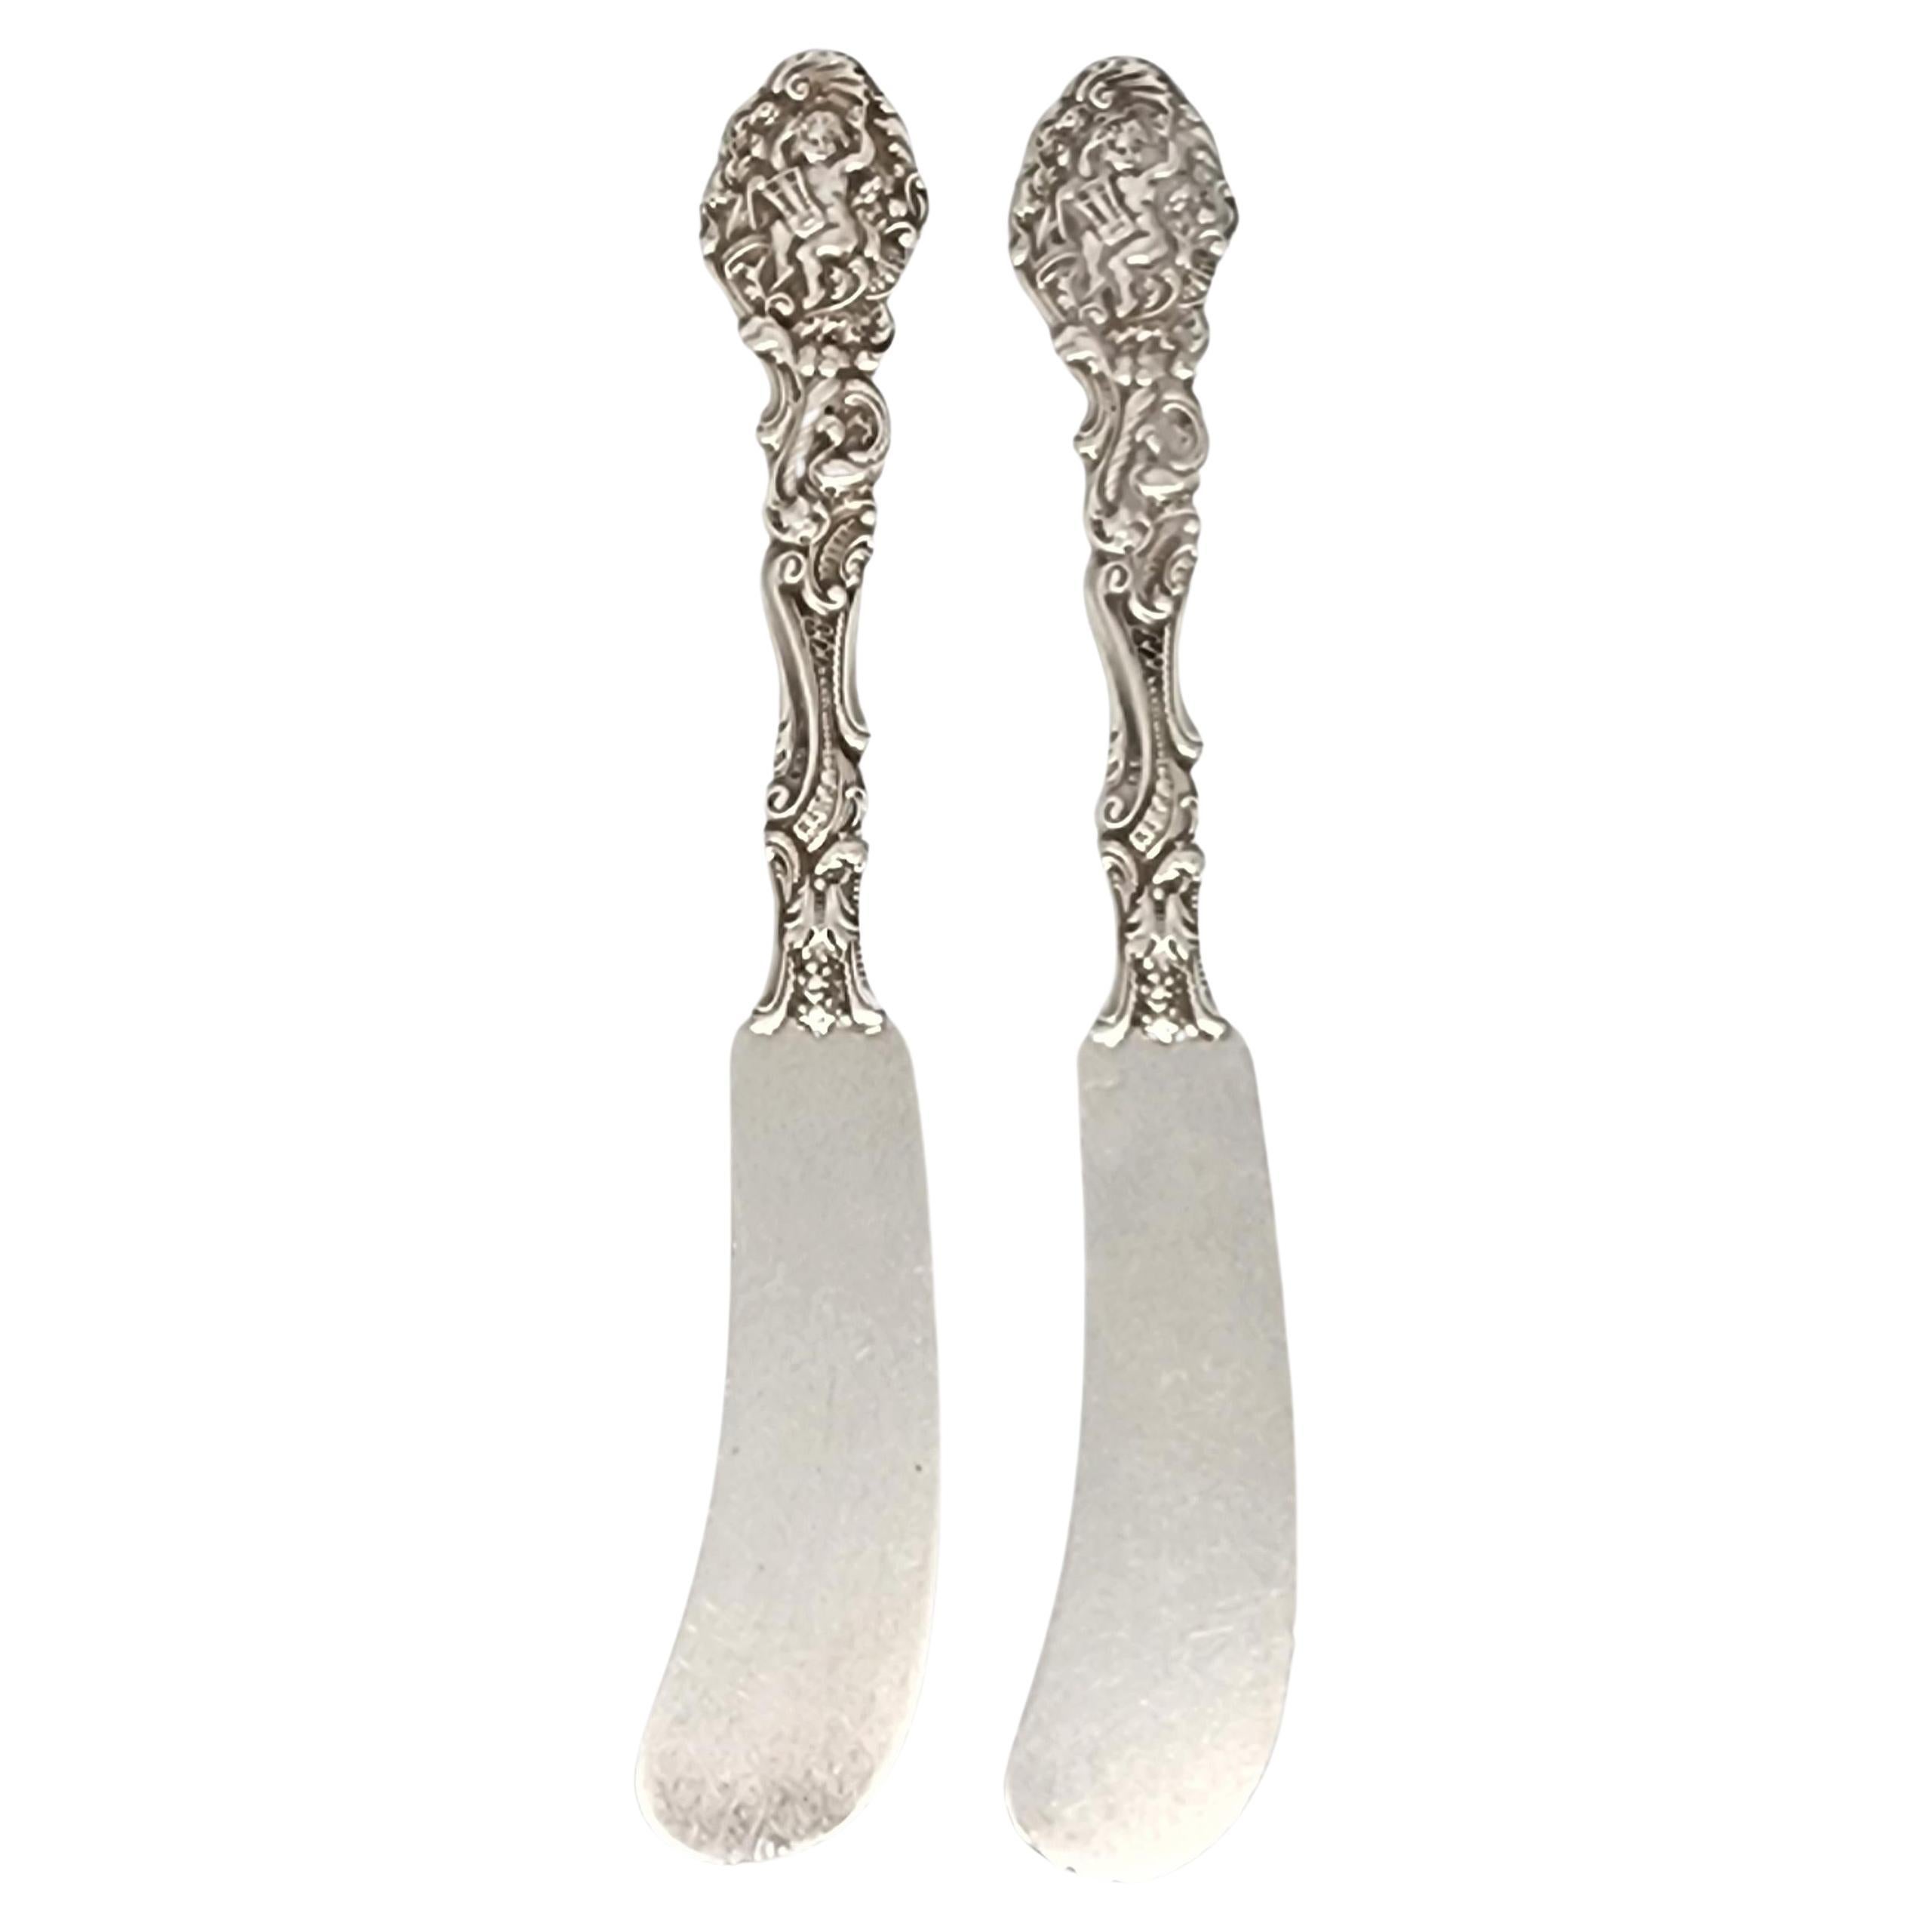 2 Gorham Versailles Sterling Silver Flat Handle Butter Spreaders w/Mono #17136 For Sale